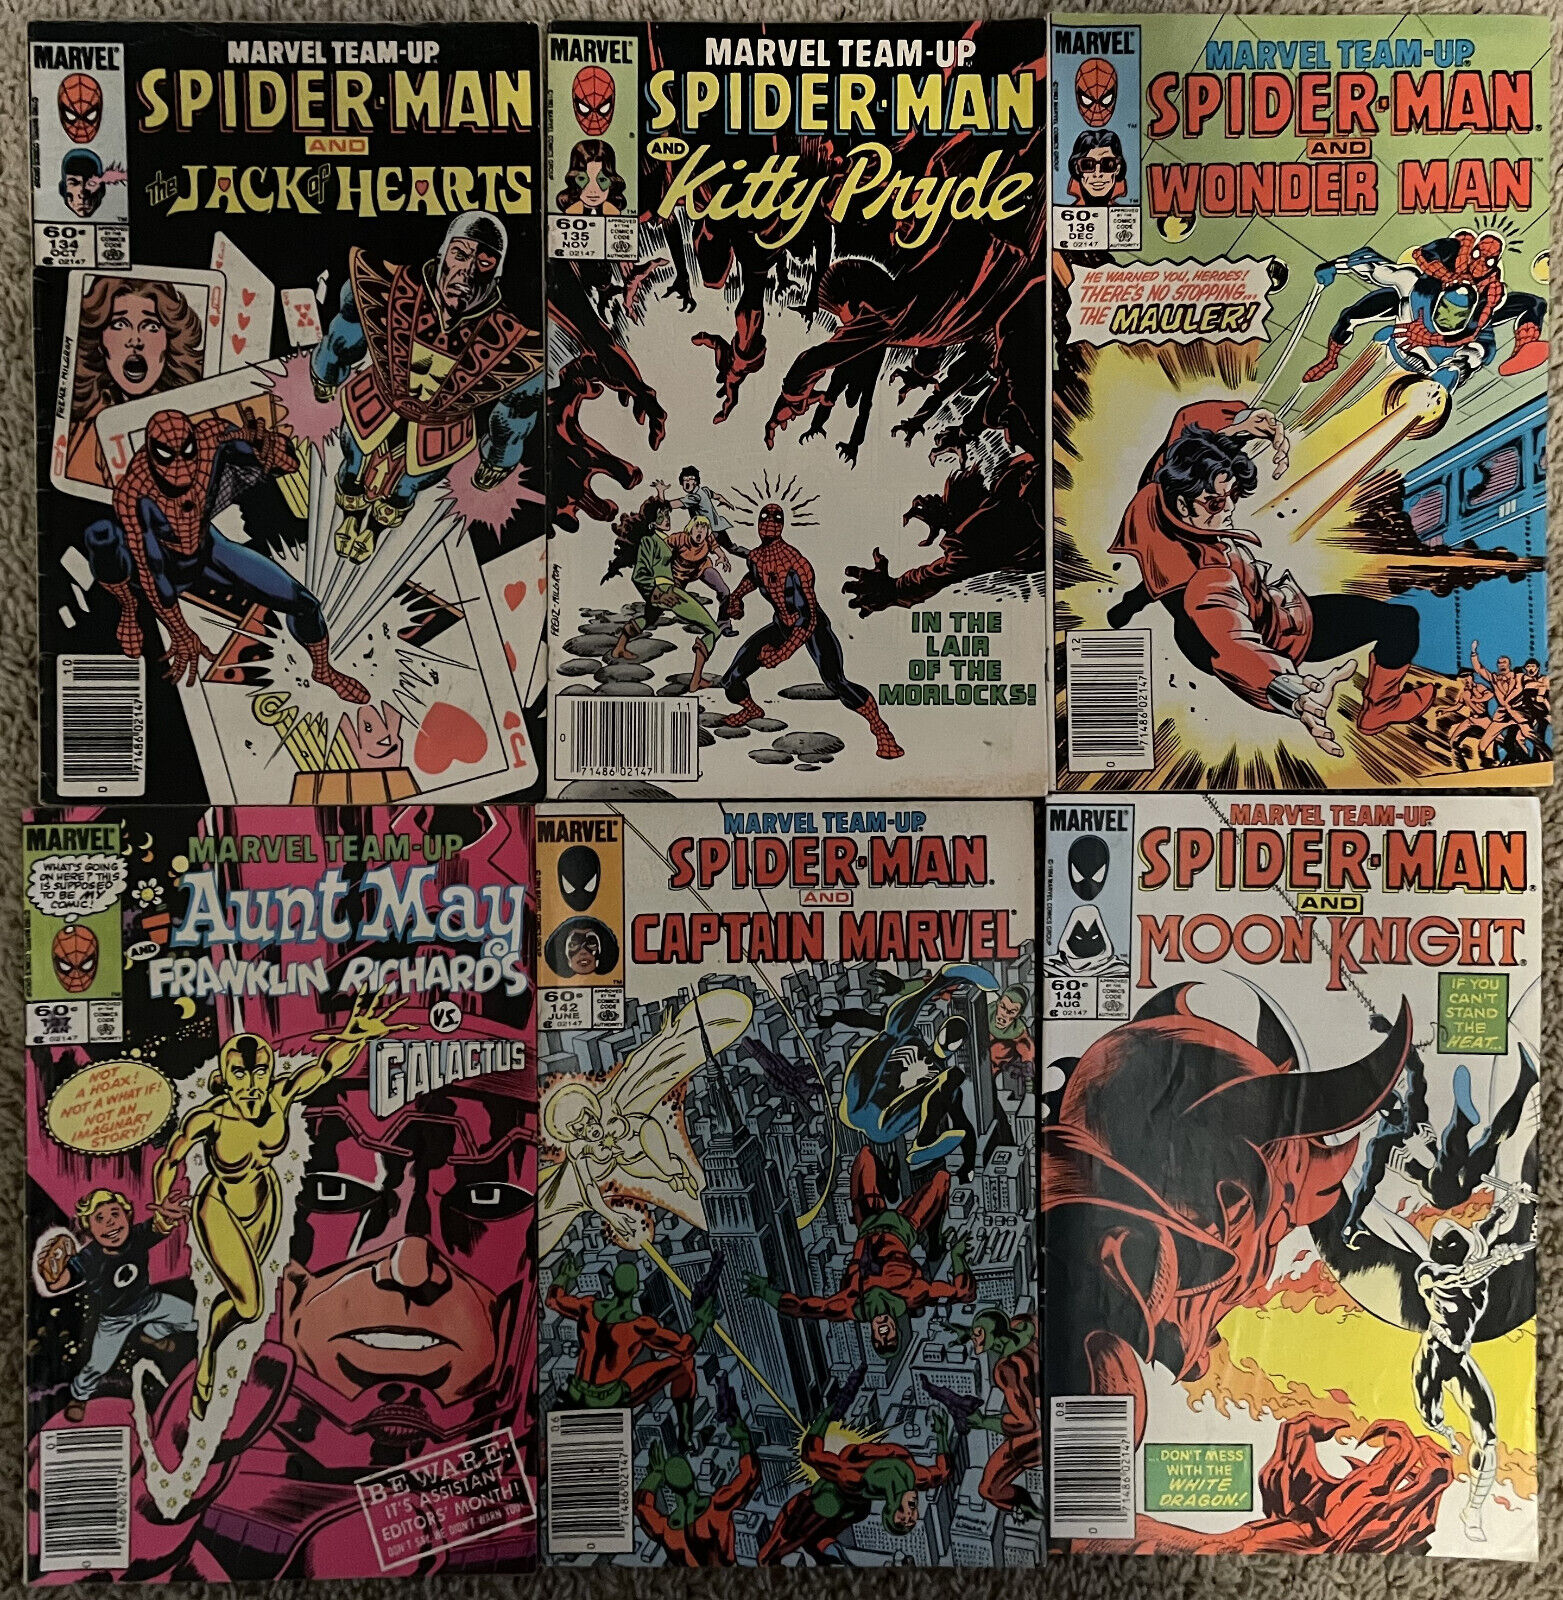 Marvel Team-Up Spider-man Lot #11 Marvel comic  series from the 1970s